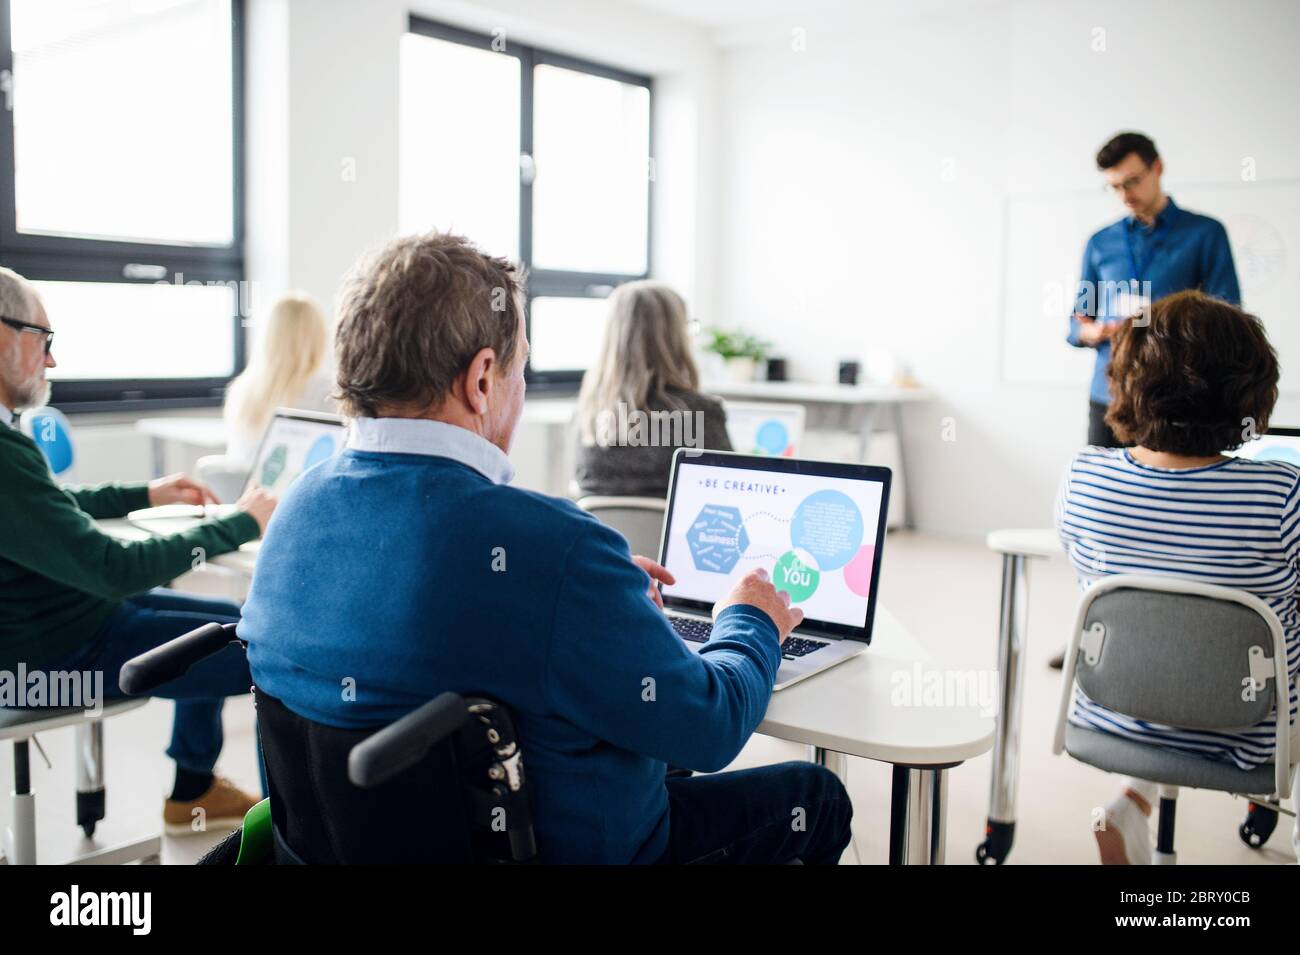 Group of senior people attending computer and technology education class. Stock Photo